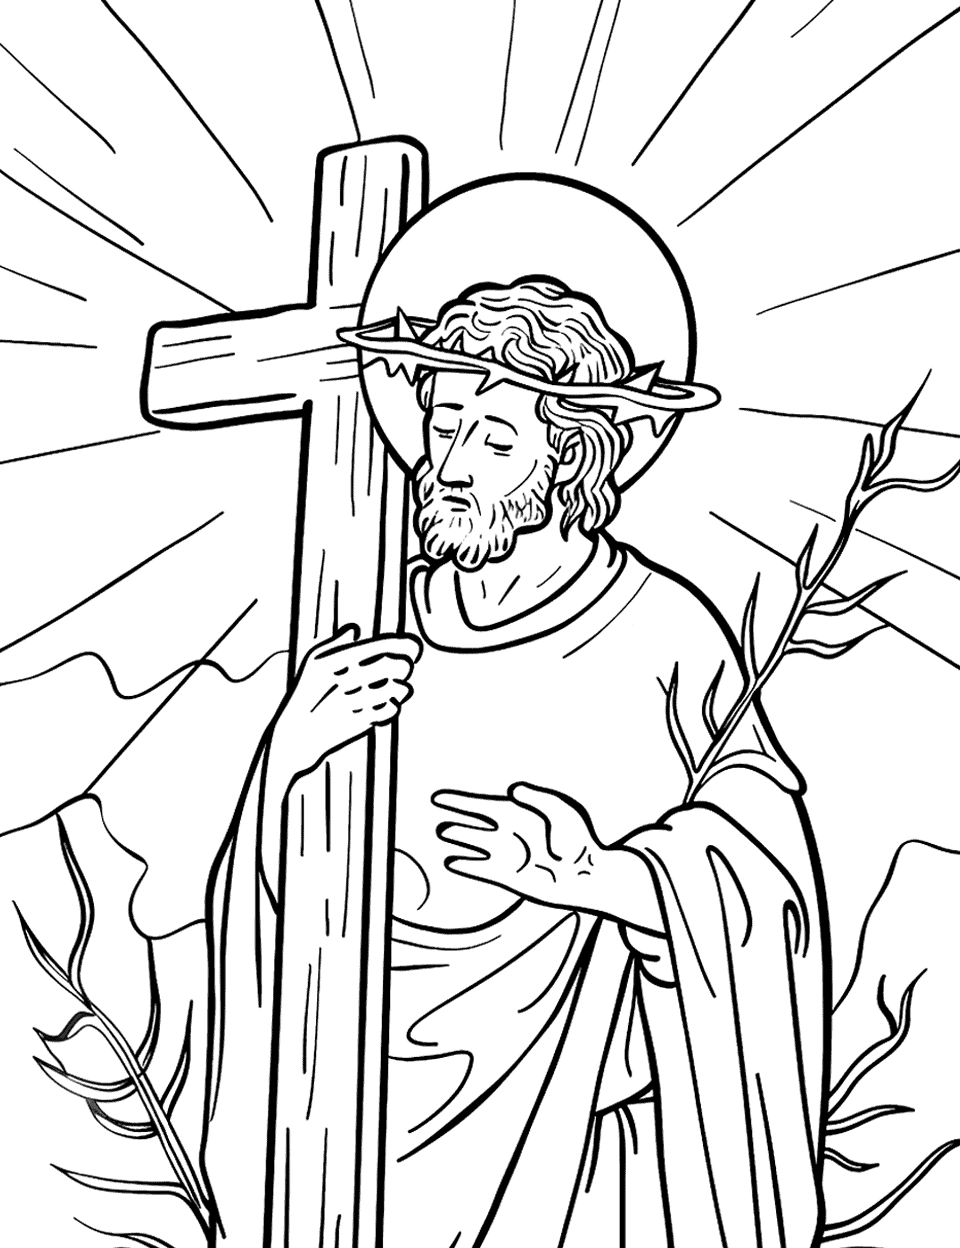 Saint Holding a Cross Coloring Page - A gentle saint holding a simple cross, with a halo over his head.